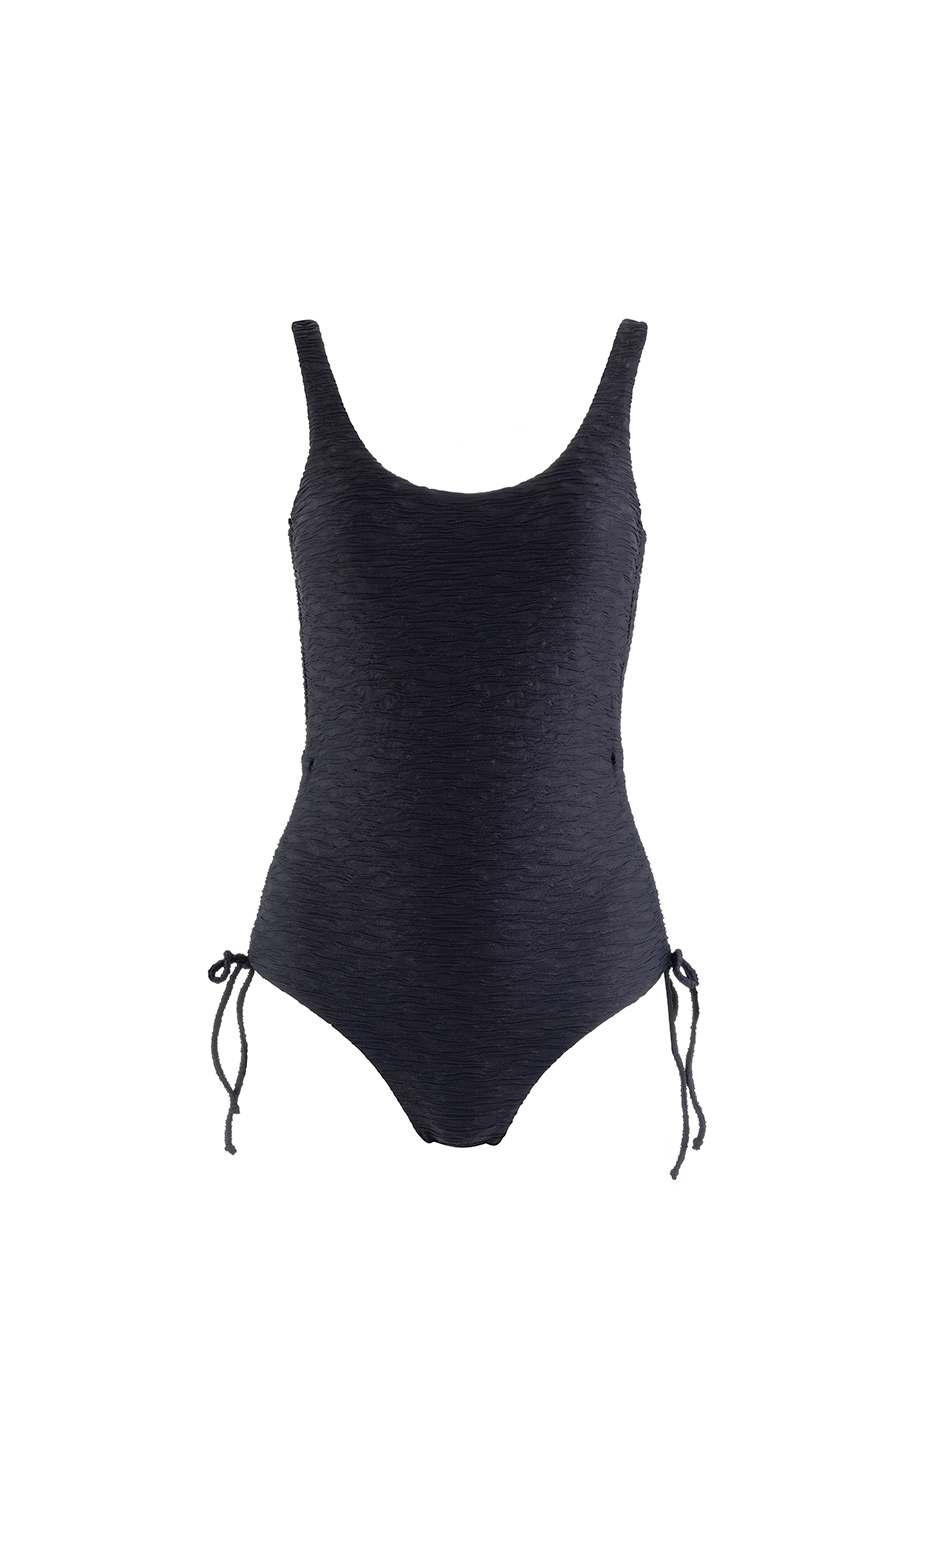 classic swimsuit with side ties